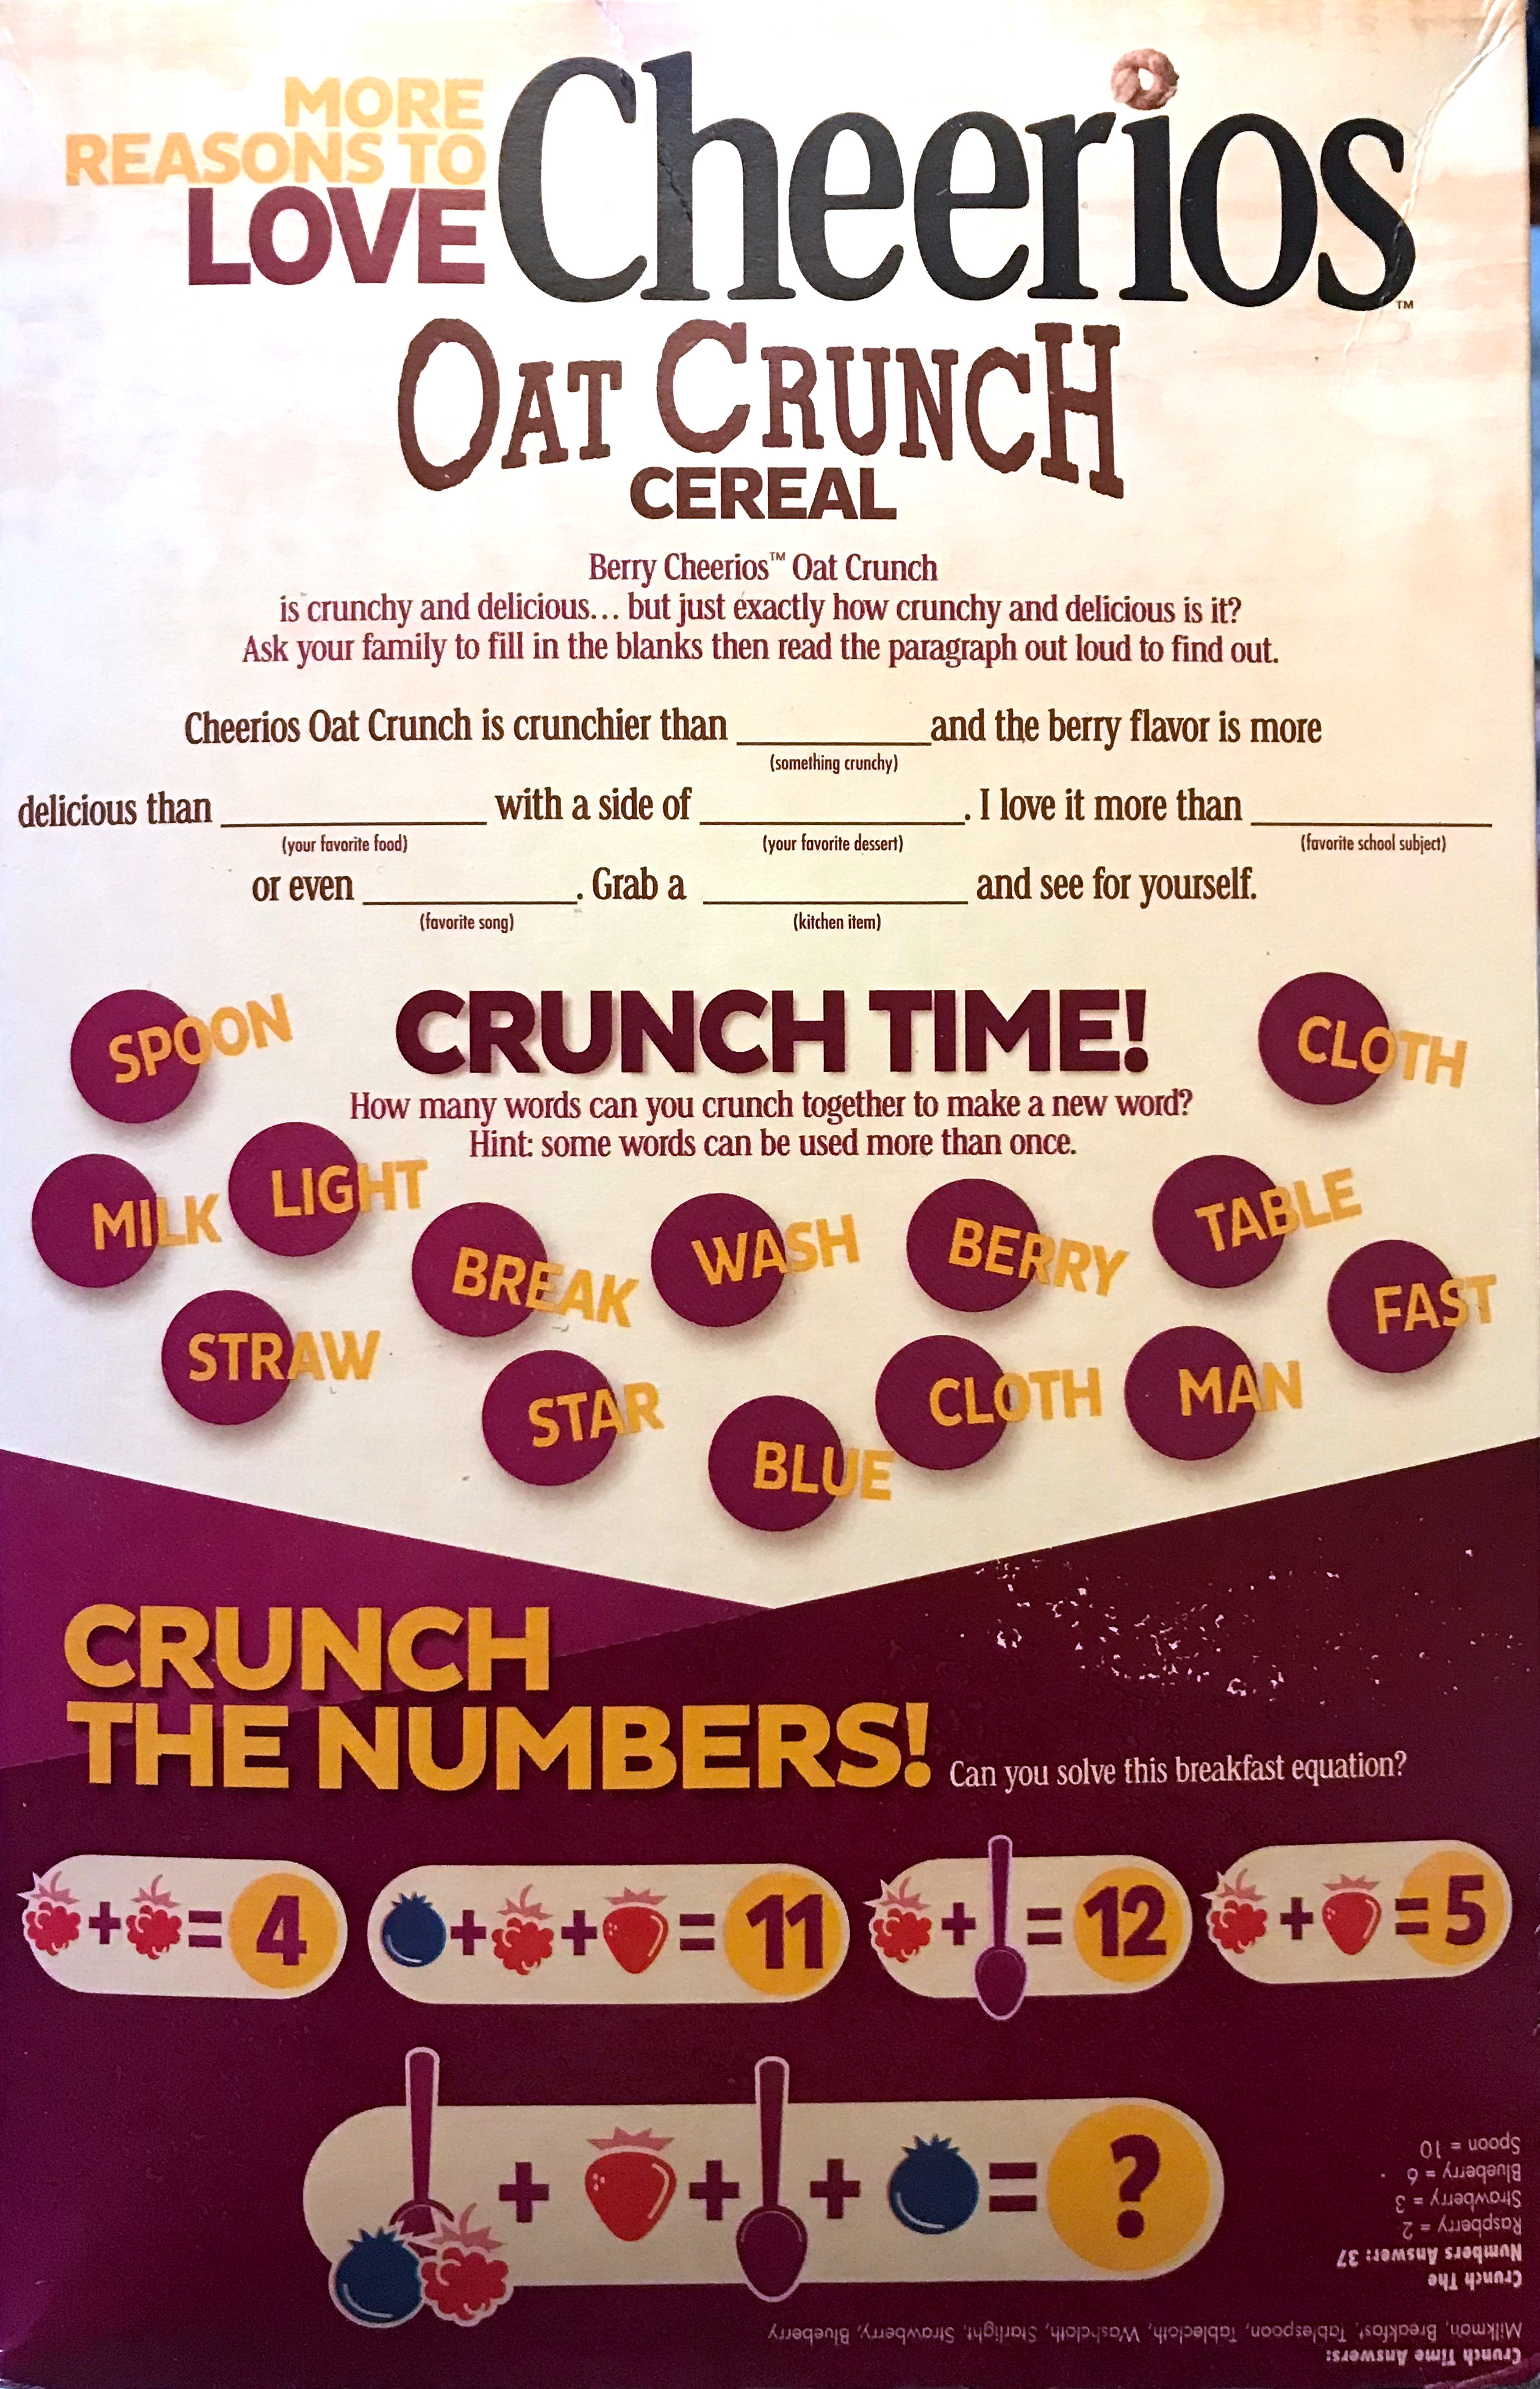 image of the back of a Cheerios box with activities